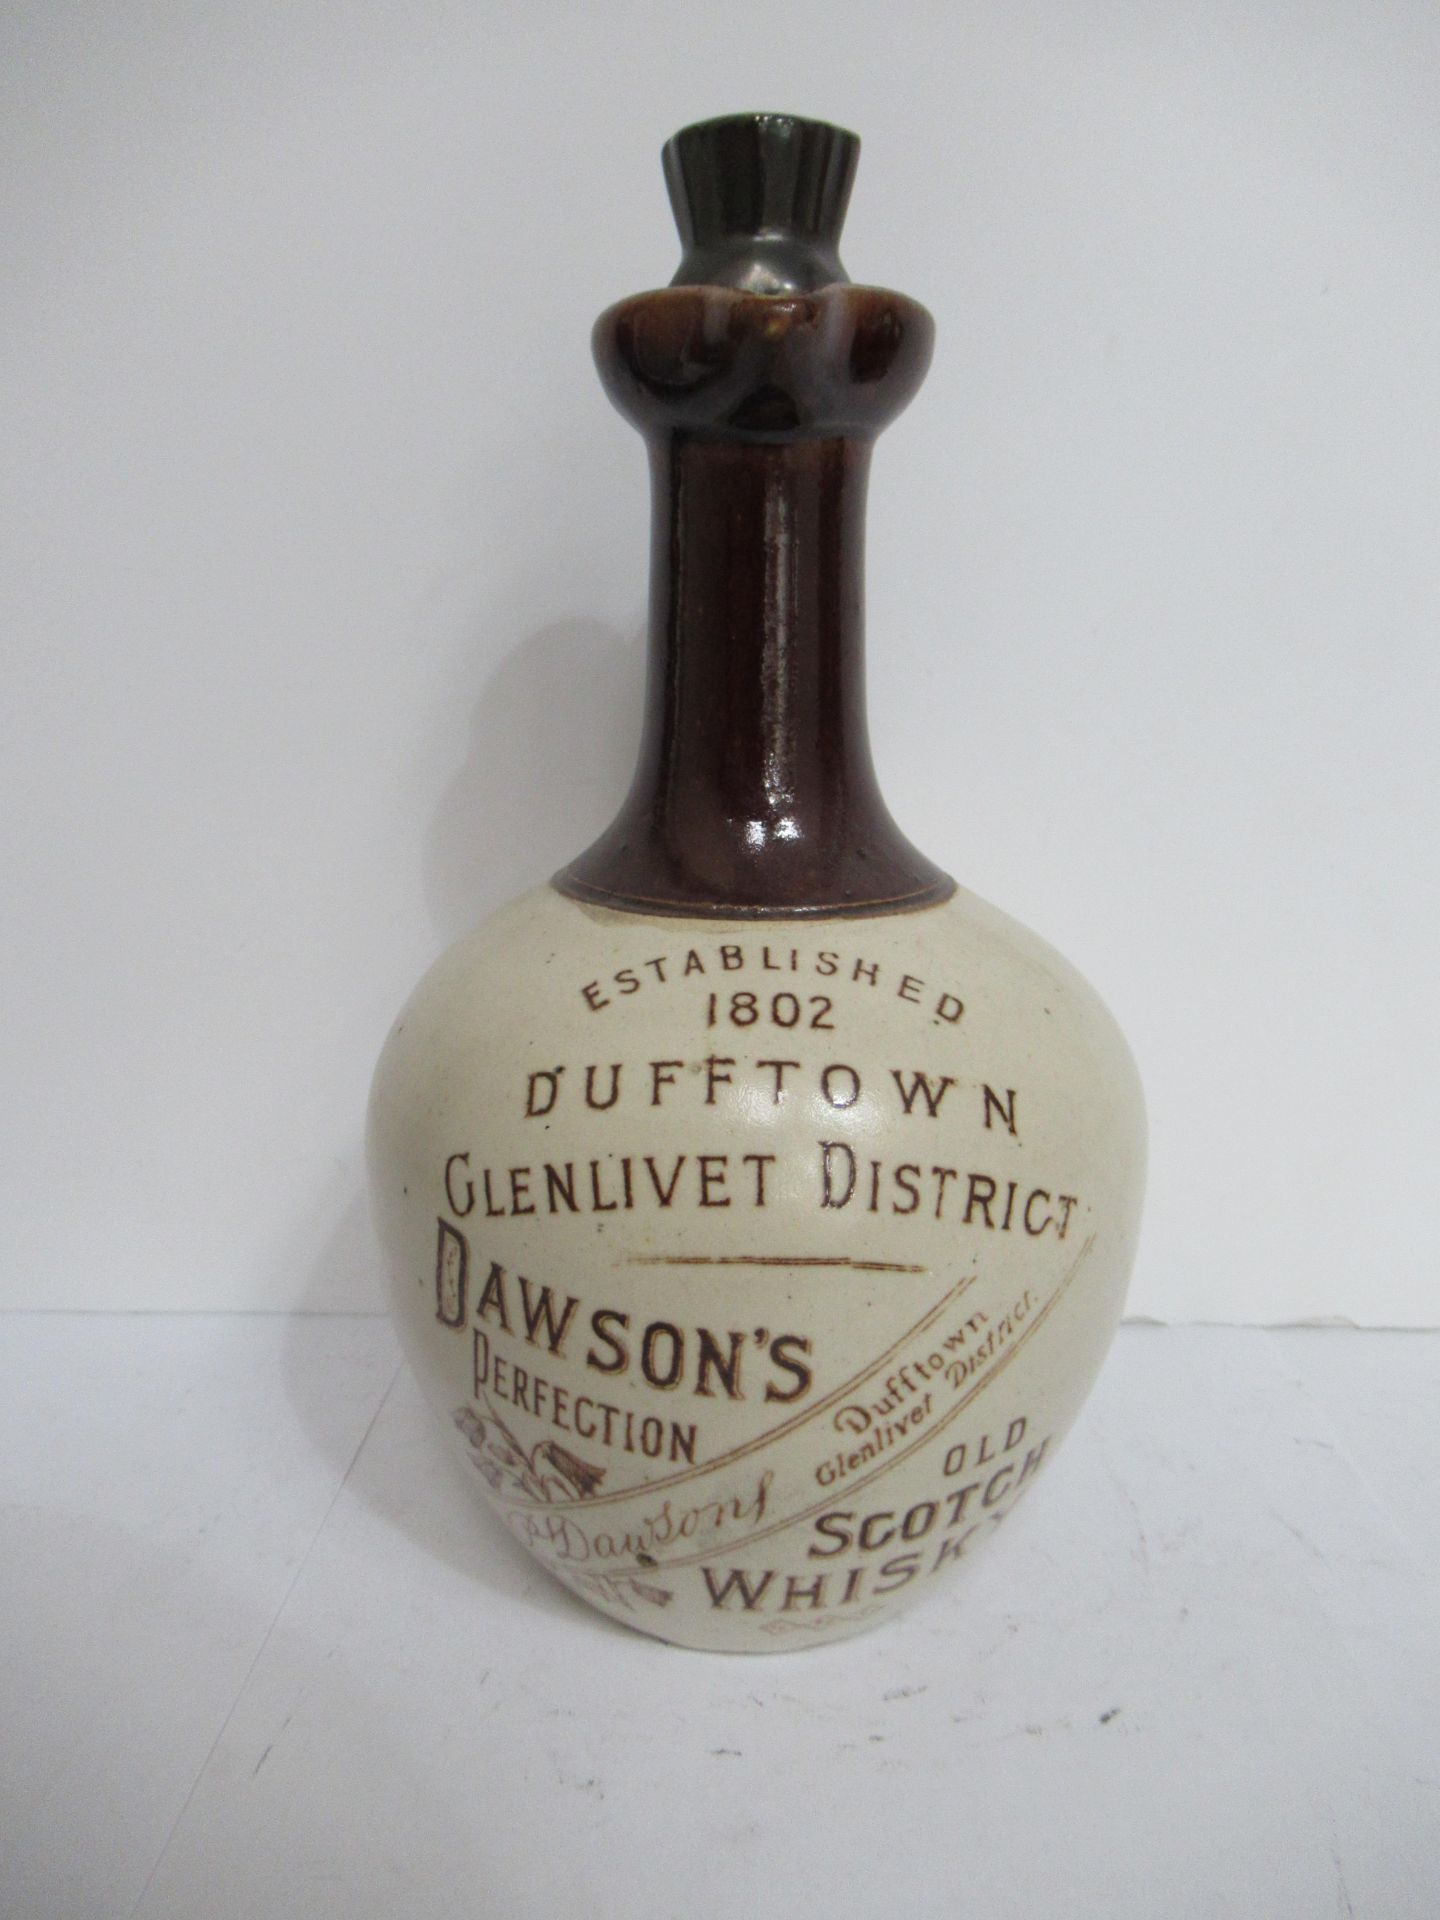 Dawson's Perfection old scotch whisky Dufftown Glenlivet distract jug with stopper